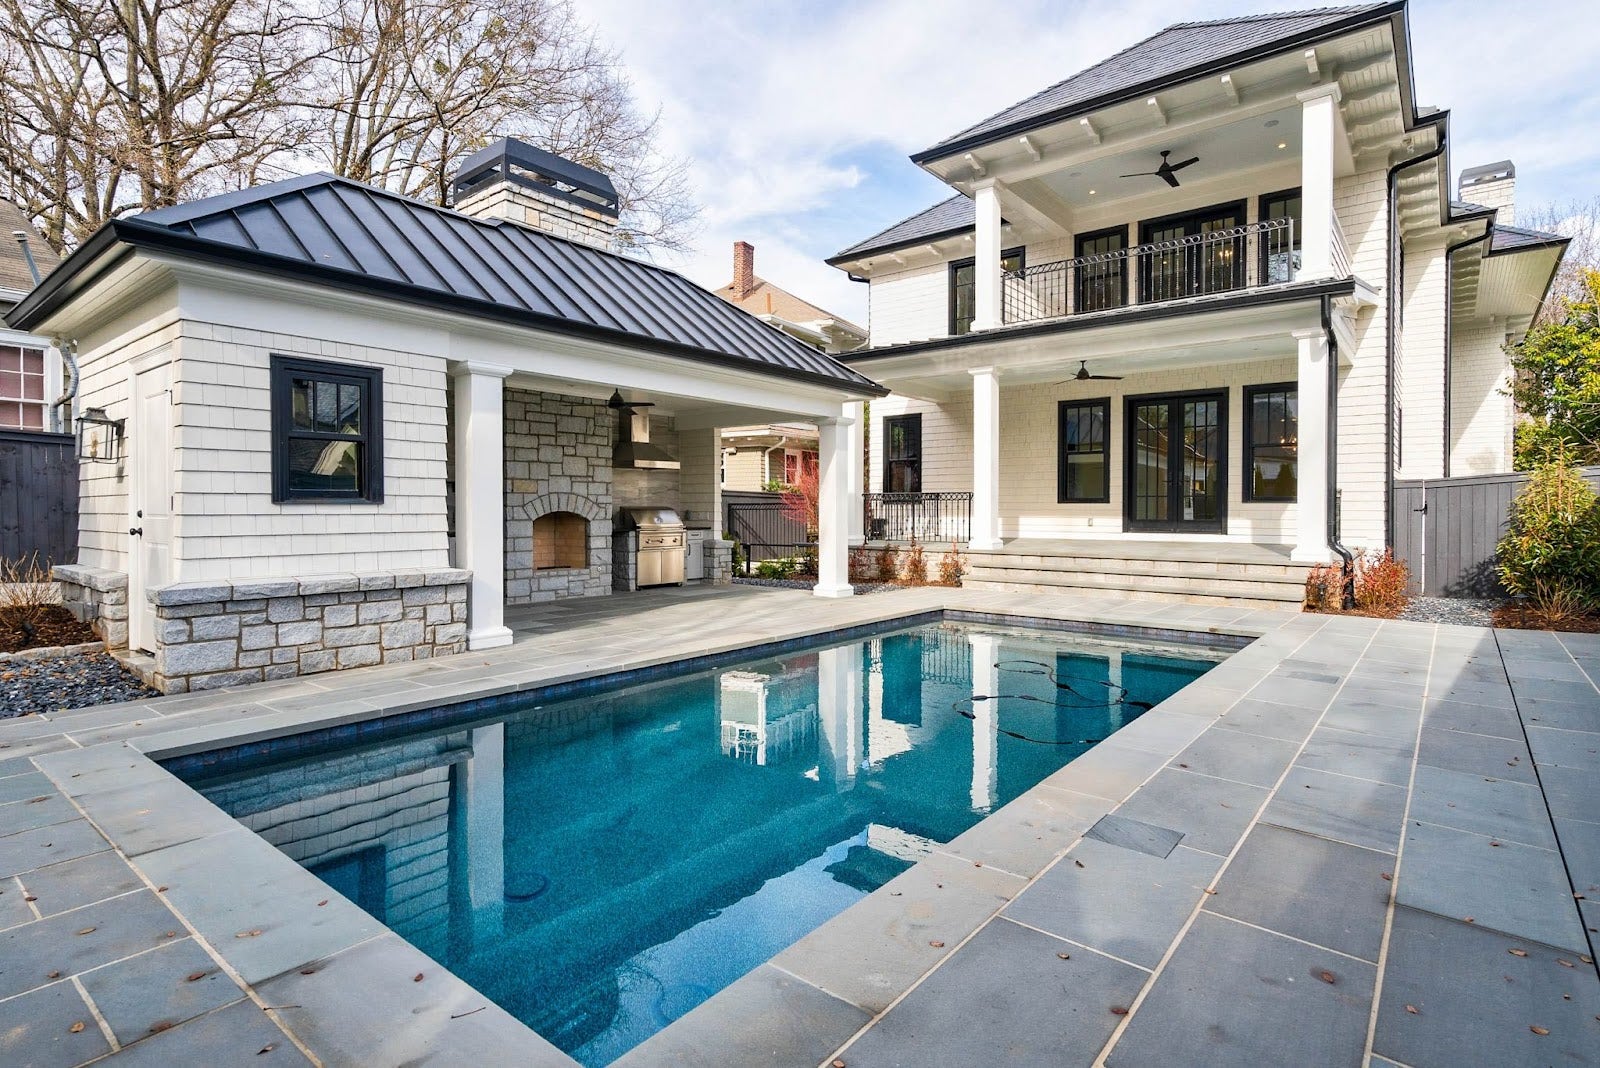 Elegant backyard retreat featuring a pristine pool, a cozy outdoor kitchen with a Proline range hood, and a classic fireplace, ideal for luxury living - prolinerangehoods.com.